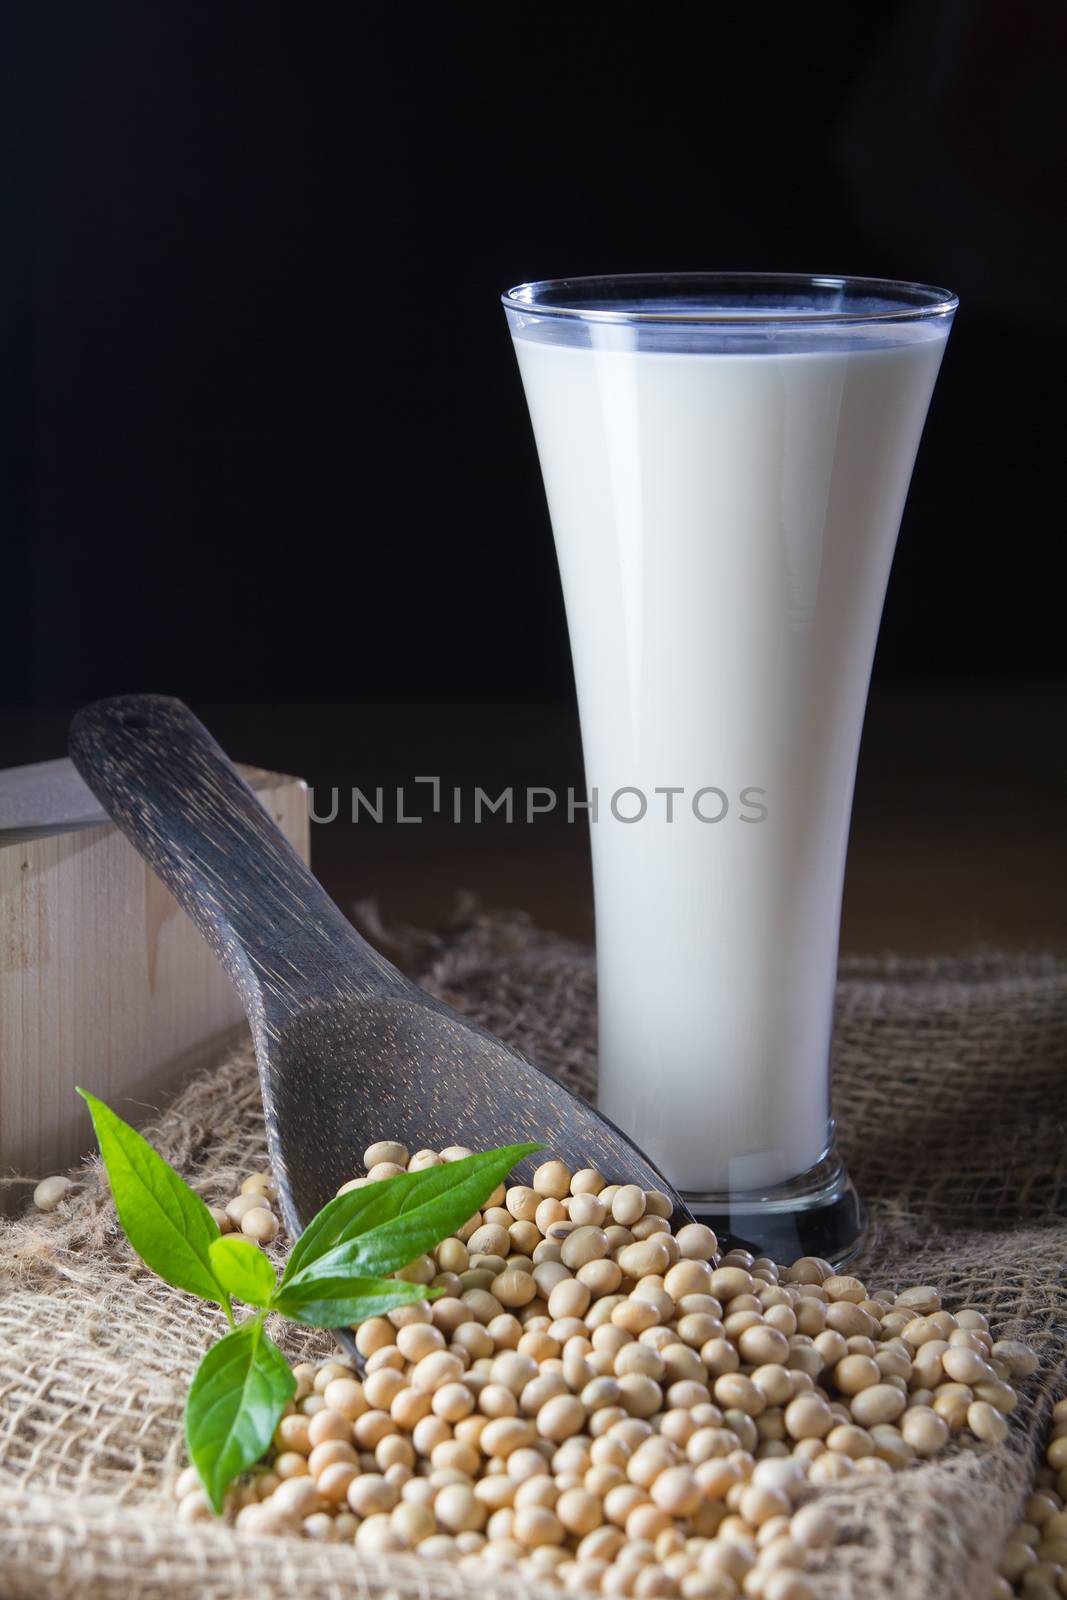 soy milk with soy beans background